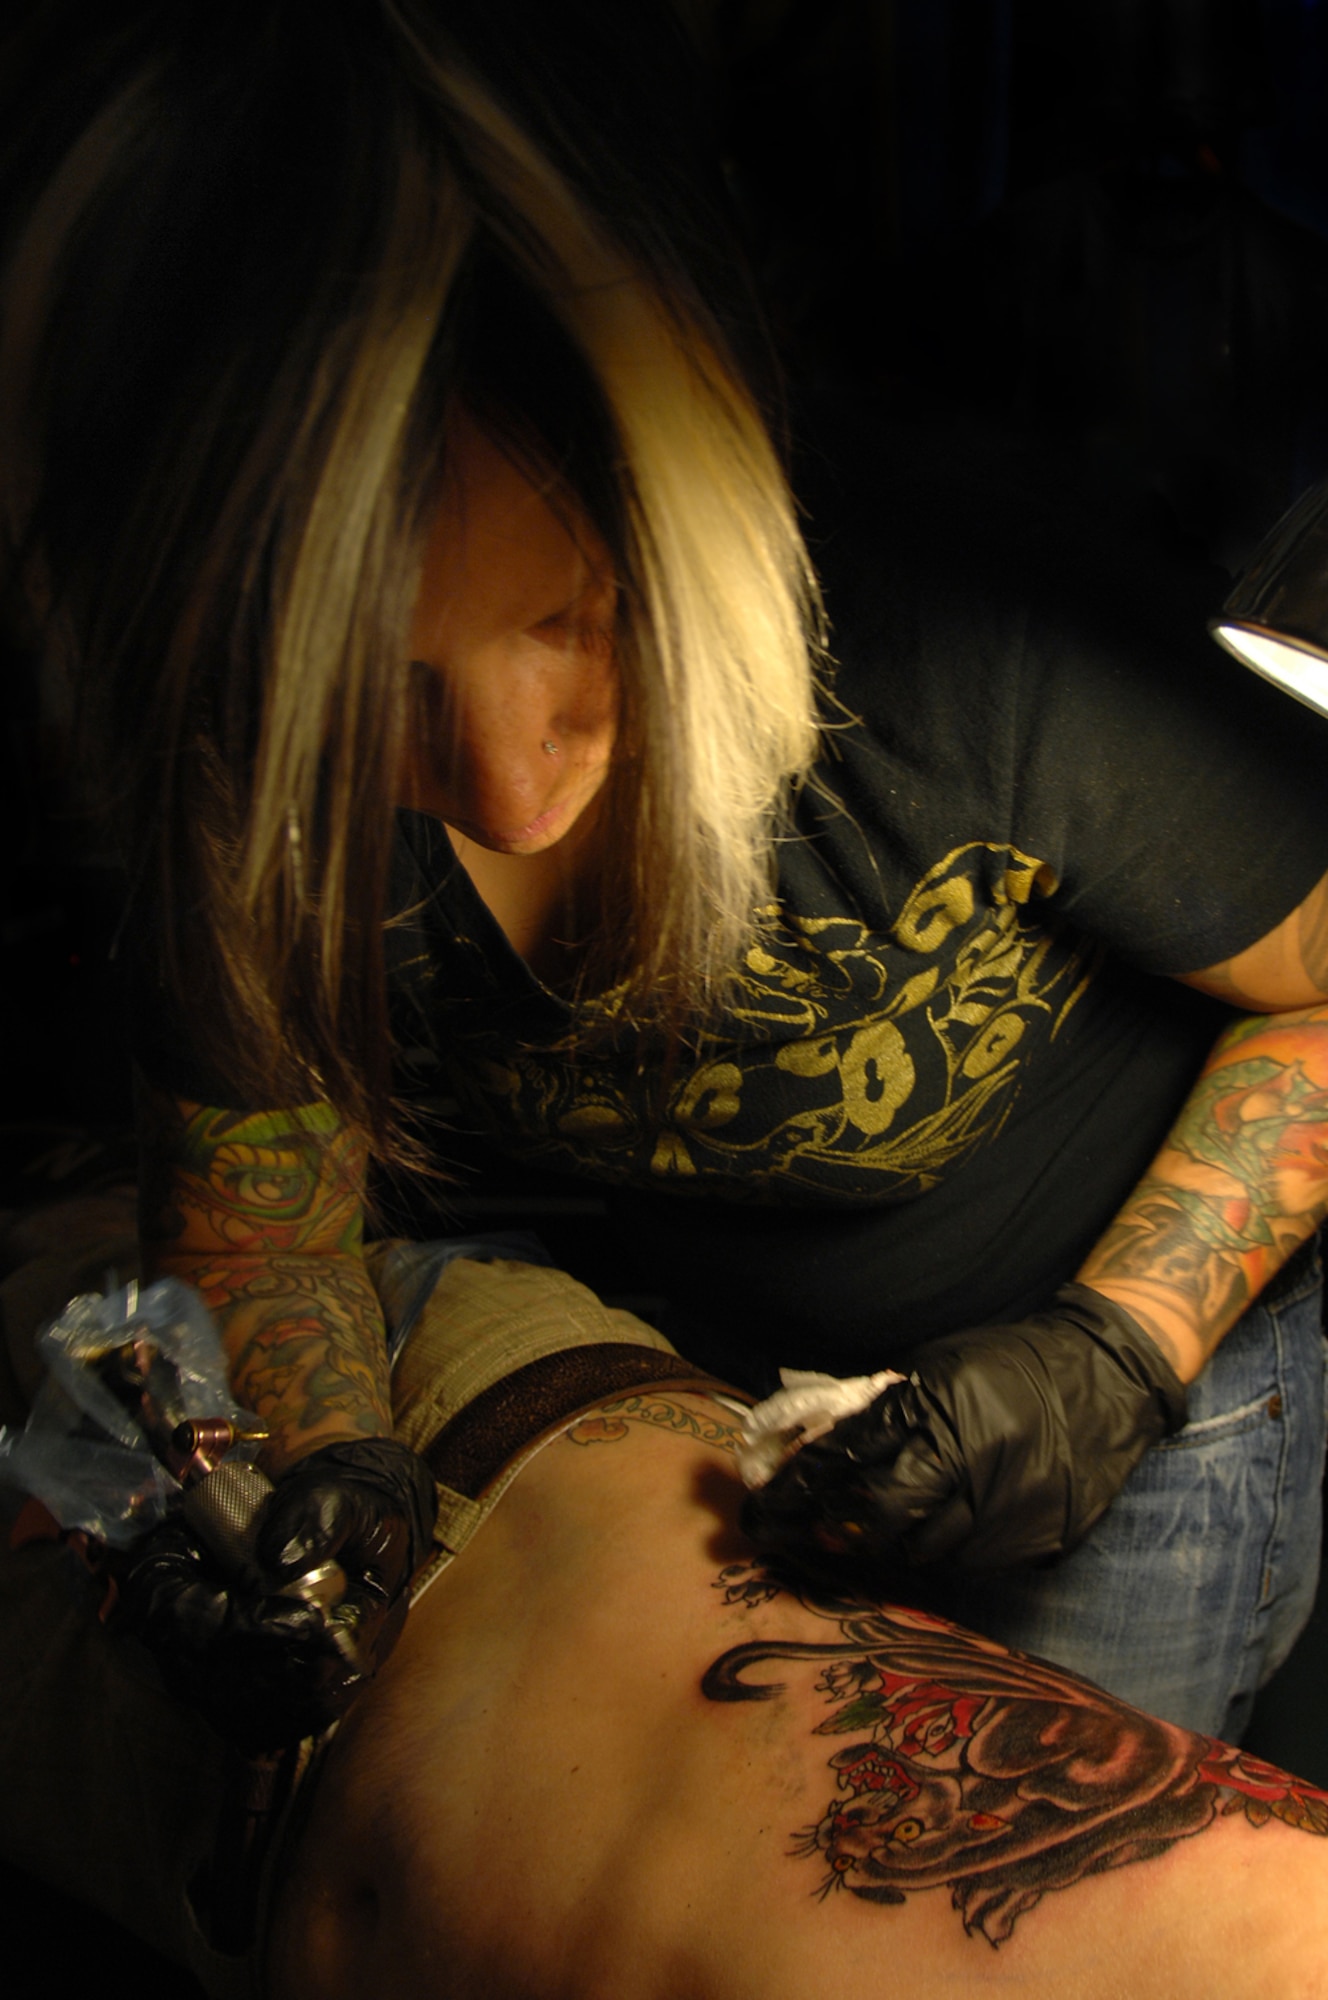 KANSAS CITY, Mo. - Jen Beirola, prior U.S. Air Force enlisted, prepares to irrigate a fresh tattoo after putting the finishing touches on it at an annual tattoo convention July 19. Jen discovered her talent while serving in the Air Force and was inspired by the late graphic artist career field. Military members stationed at Whiteman were able to attend the convention and watch tattoo arts such as Jen perform their craft. (U.S. Air Force photo/Senior Airman Kenny Holston)